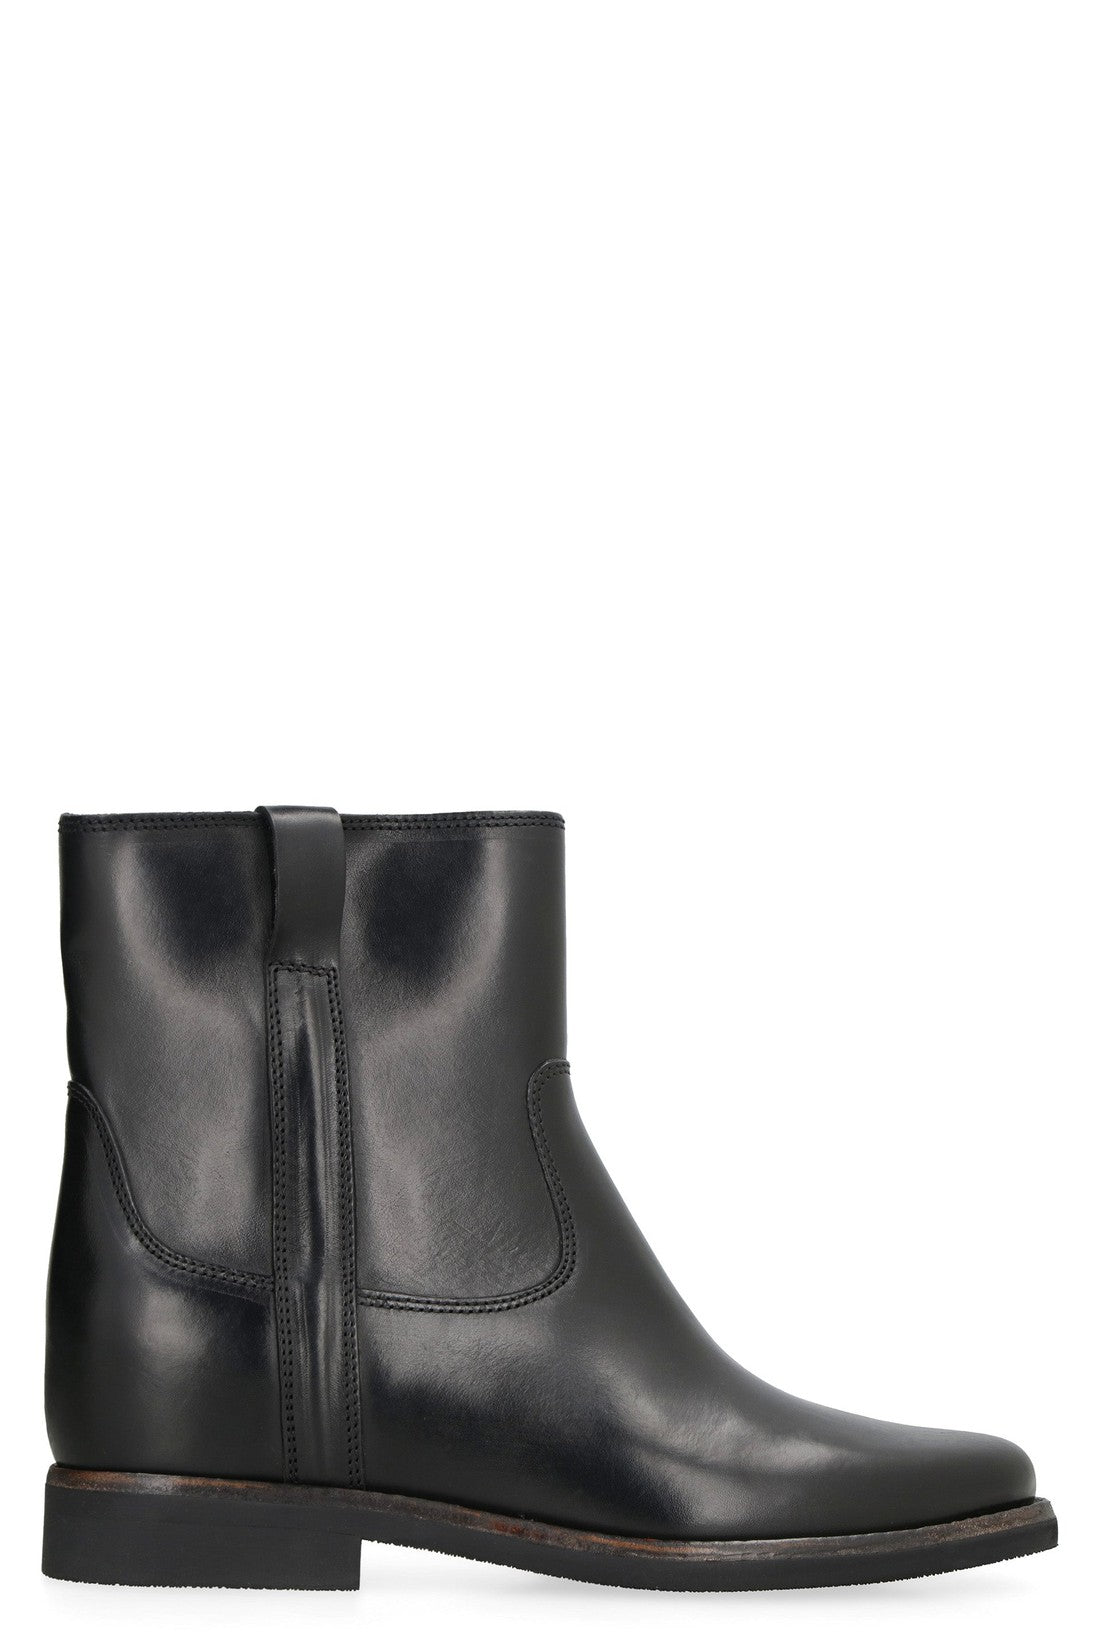 Isabel Marant-OUTLET-SALE-Susee leather ankle boots-ARCHIVIST